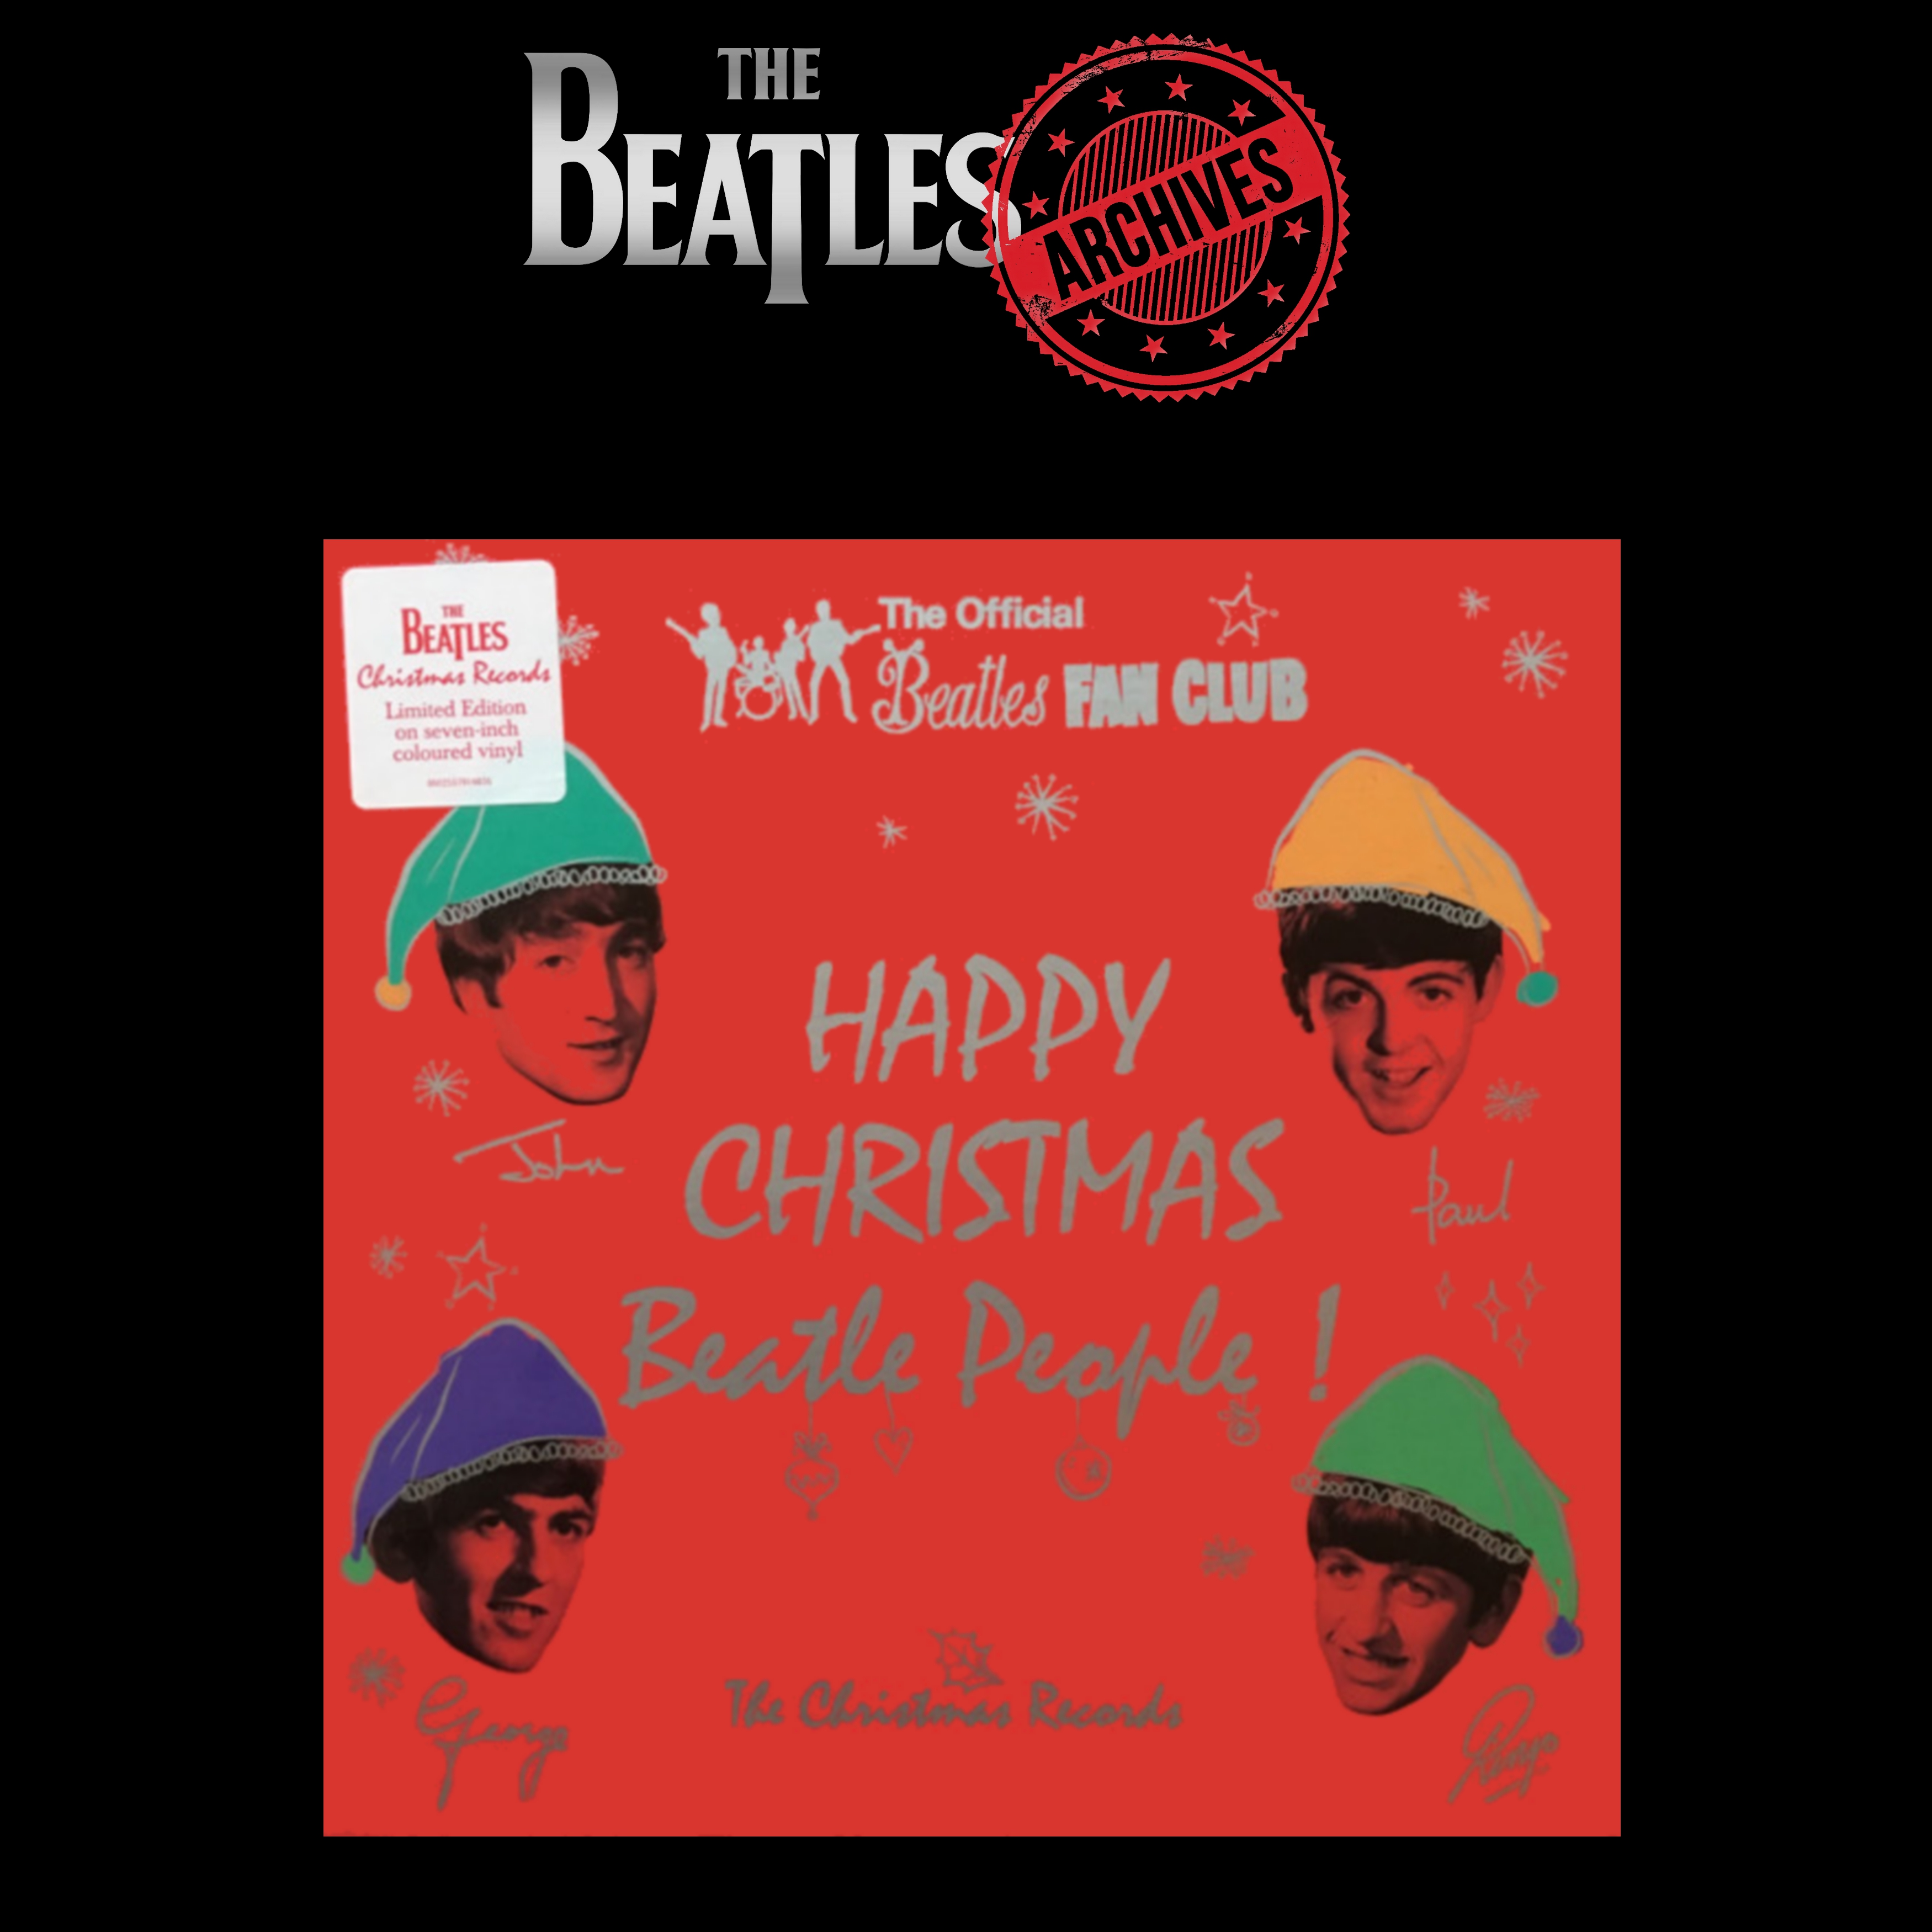 The Beatles Archives– Happy Christmas Beatle People! (The Christmas Records)